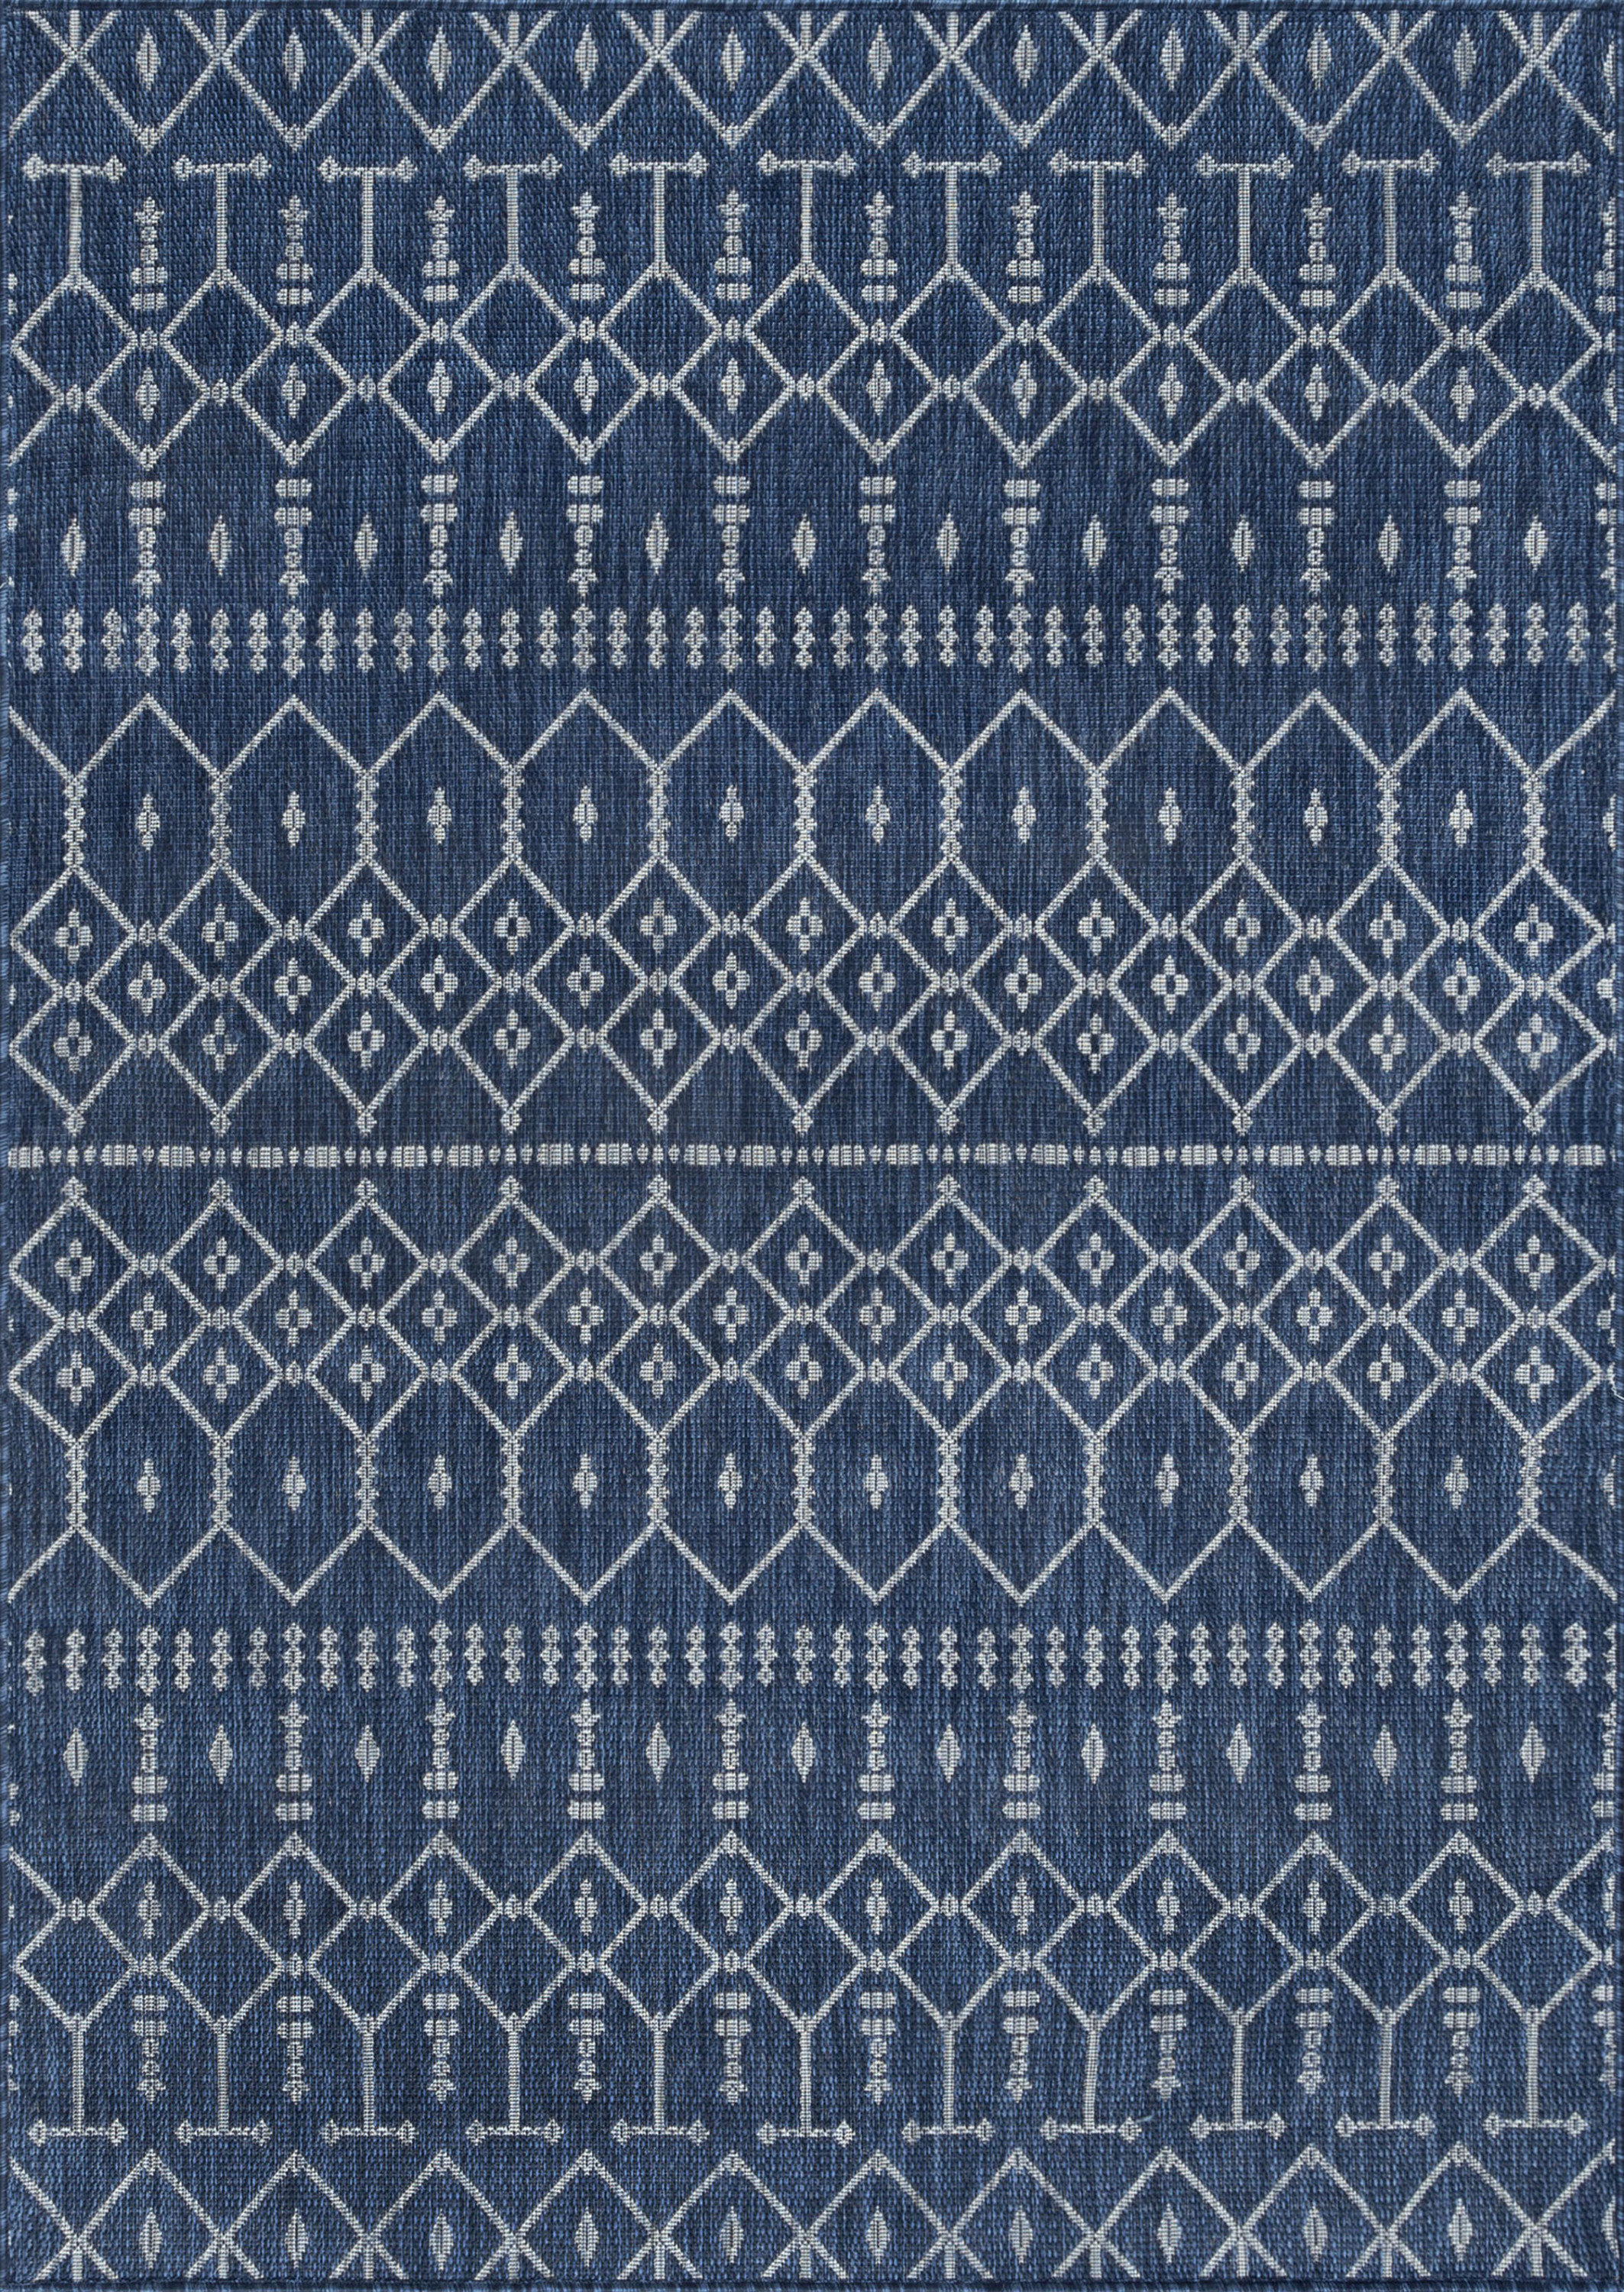 7x10 Water Resistant, Large Indoor Outdoor Rugs for Patios, Front Door Entry, Entryway, Deck, Porch, Balcony | Outside Area Rug for Patio | Navy, Geometric | Size: 6'7'' x 9'6'' - image 3 of 10